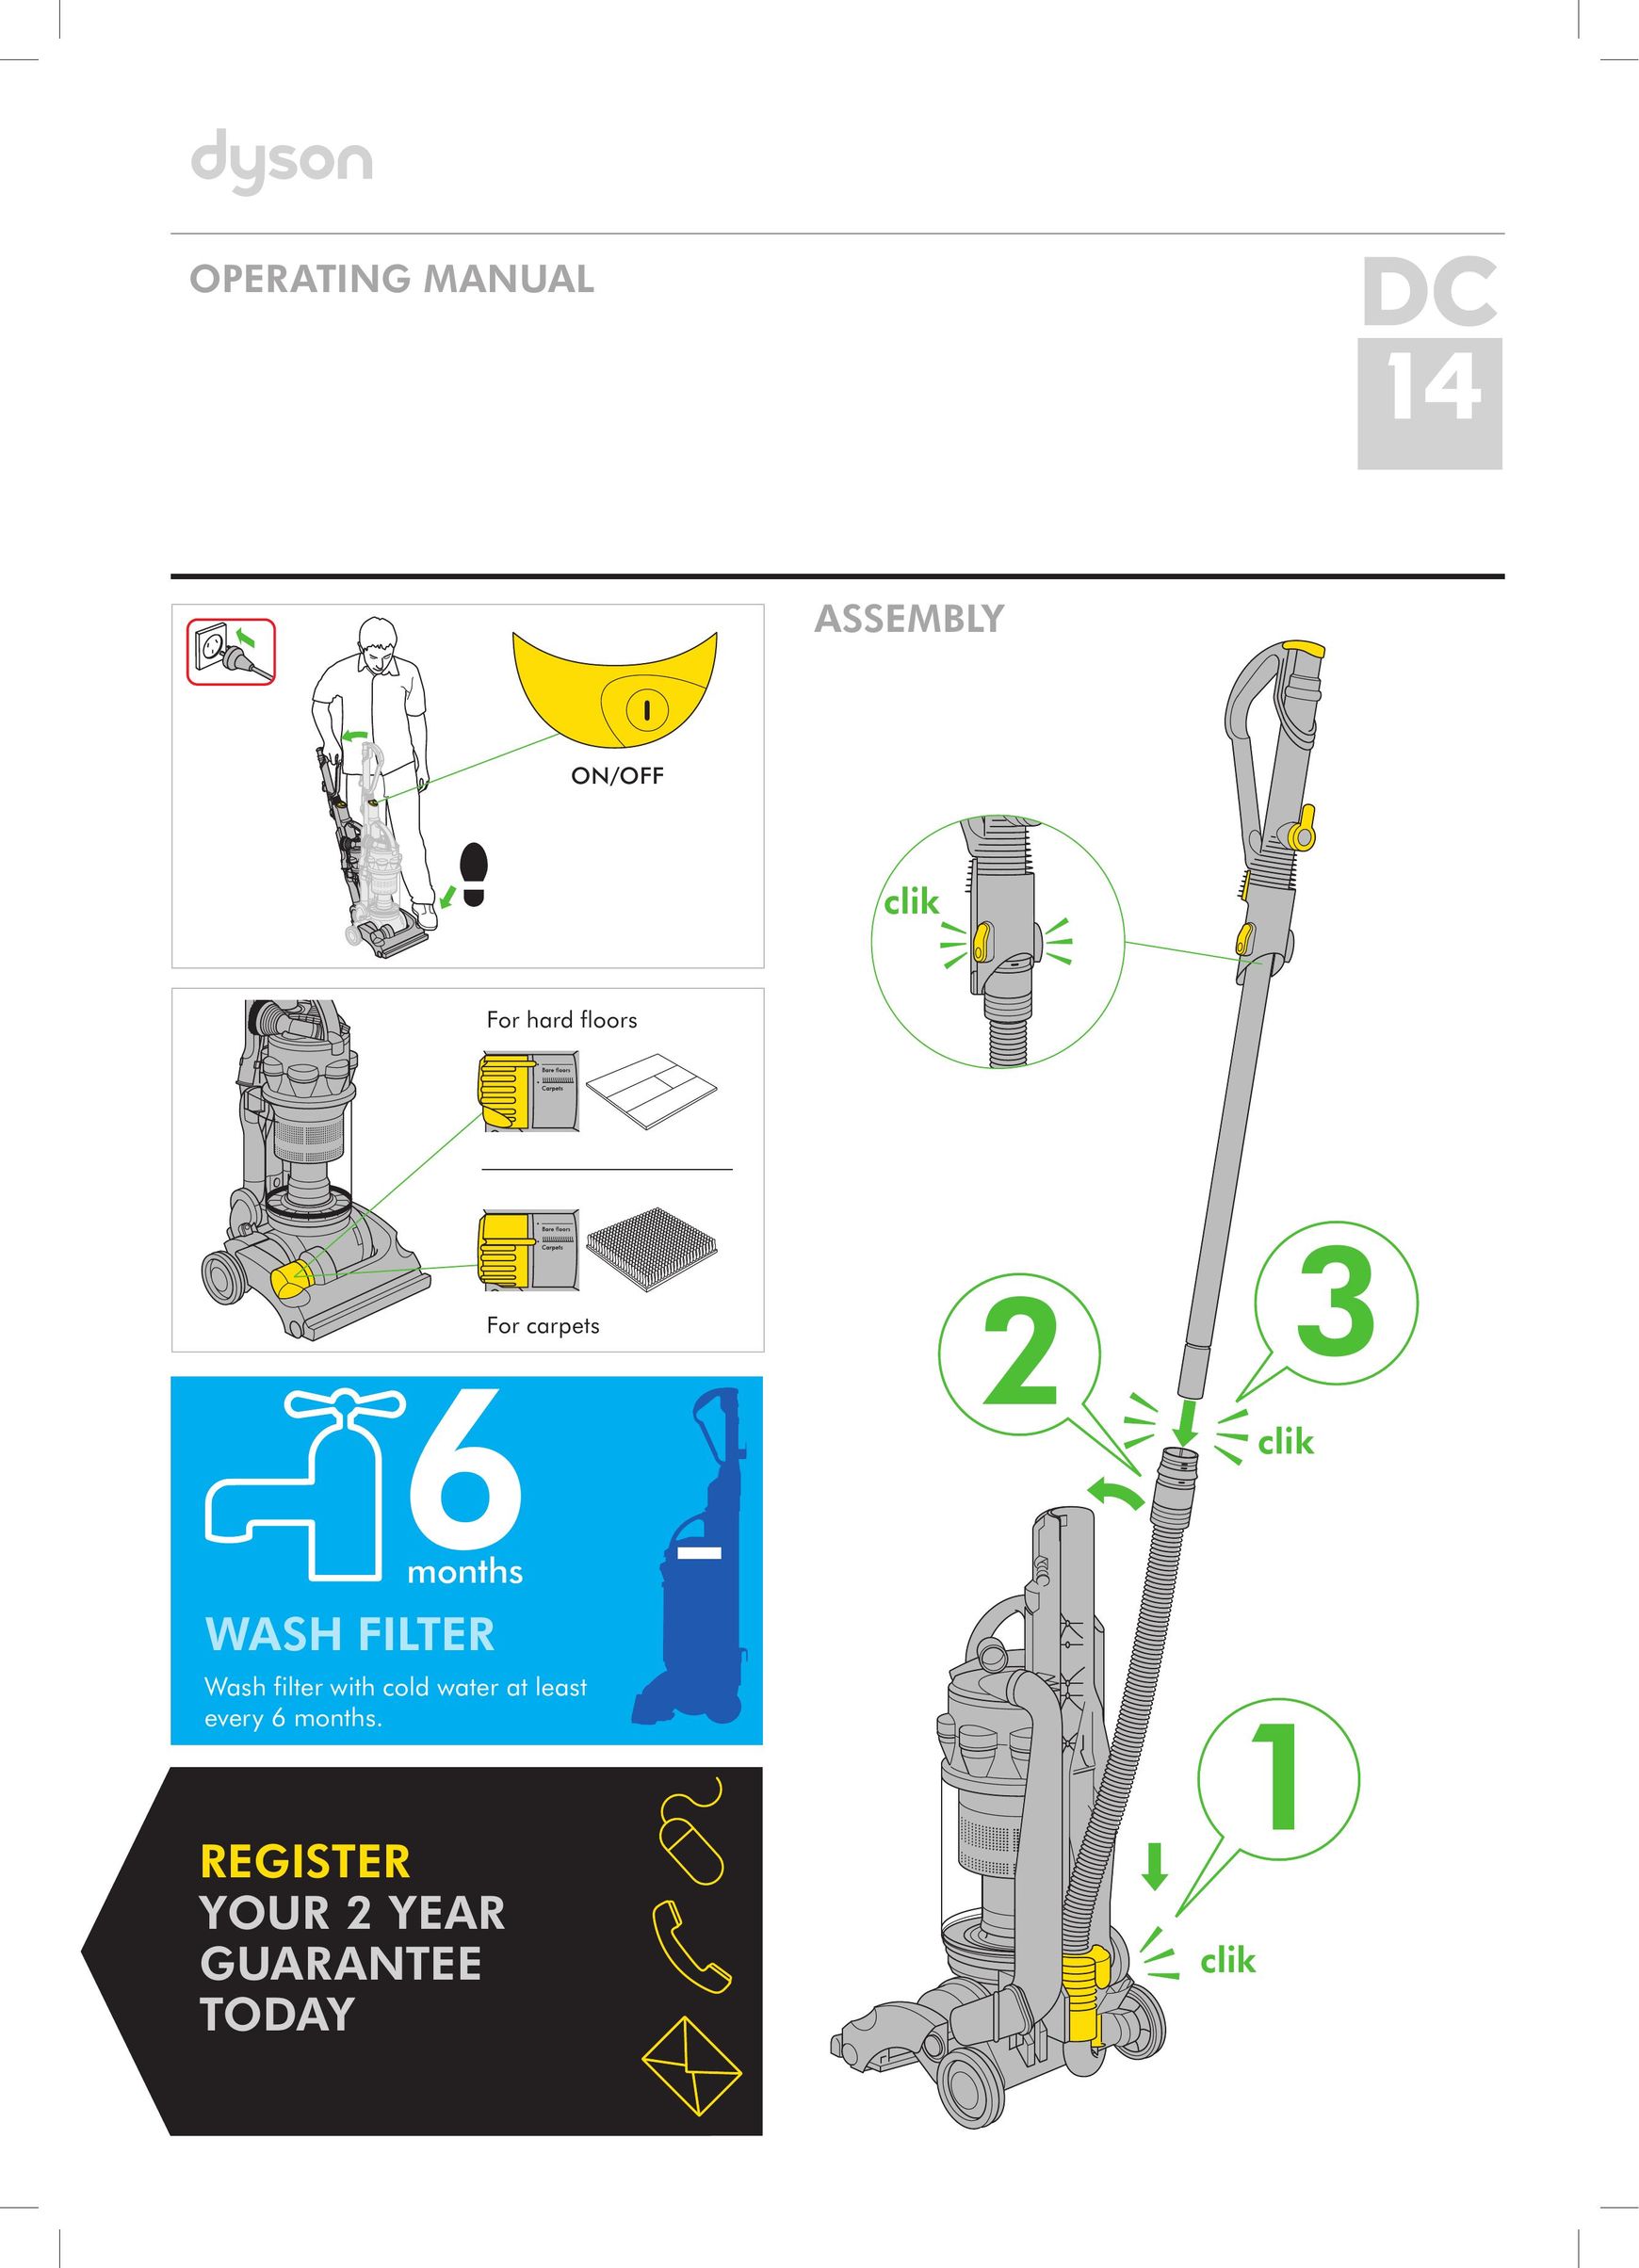 Dyson DC 14 Vacuum Cleaner User Manual